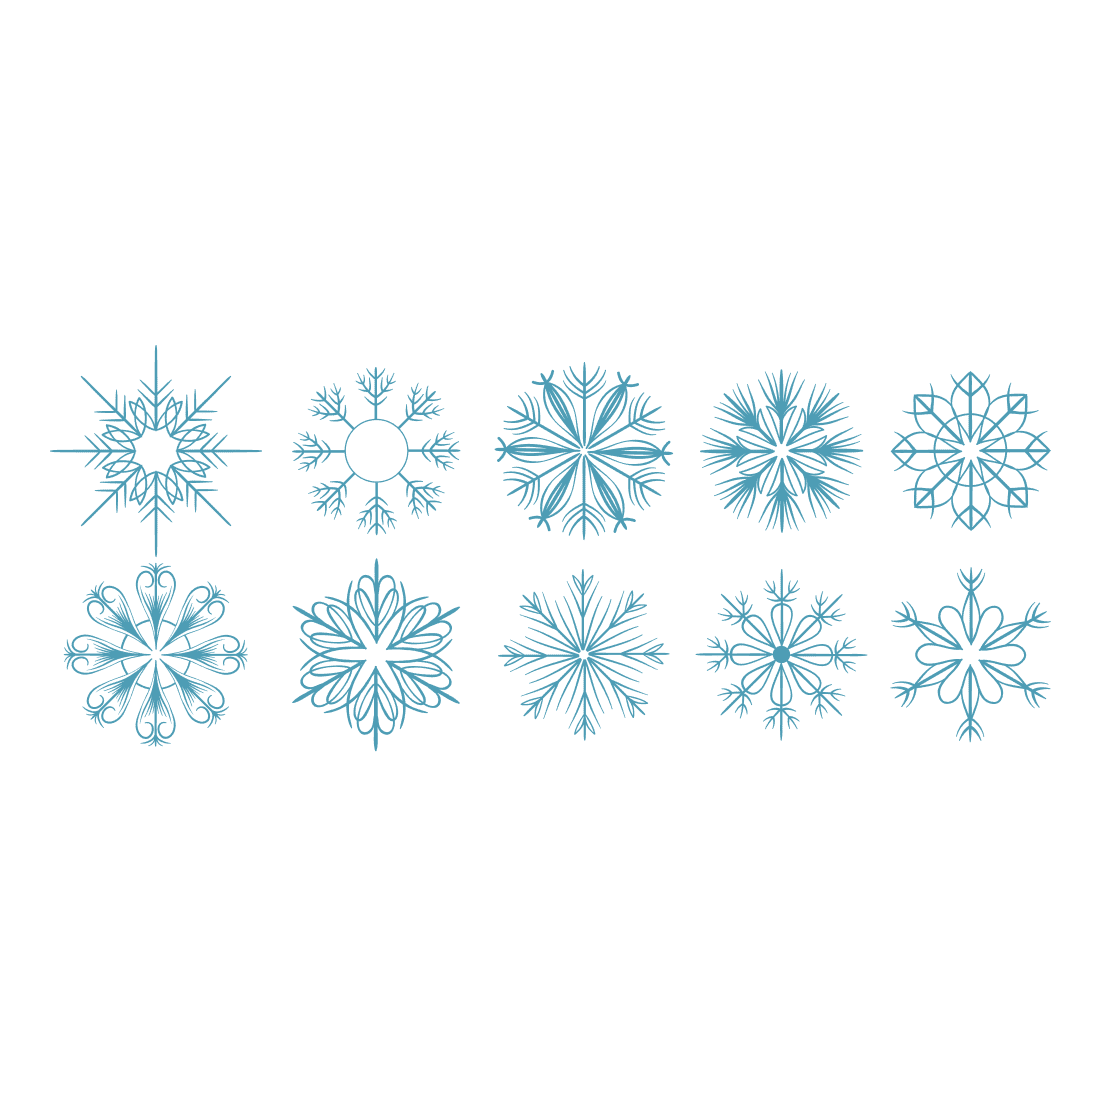 Diverse of snowflakes on the light background.